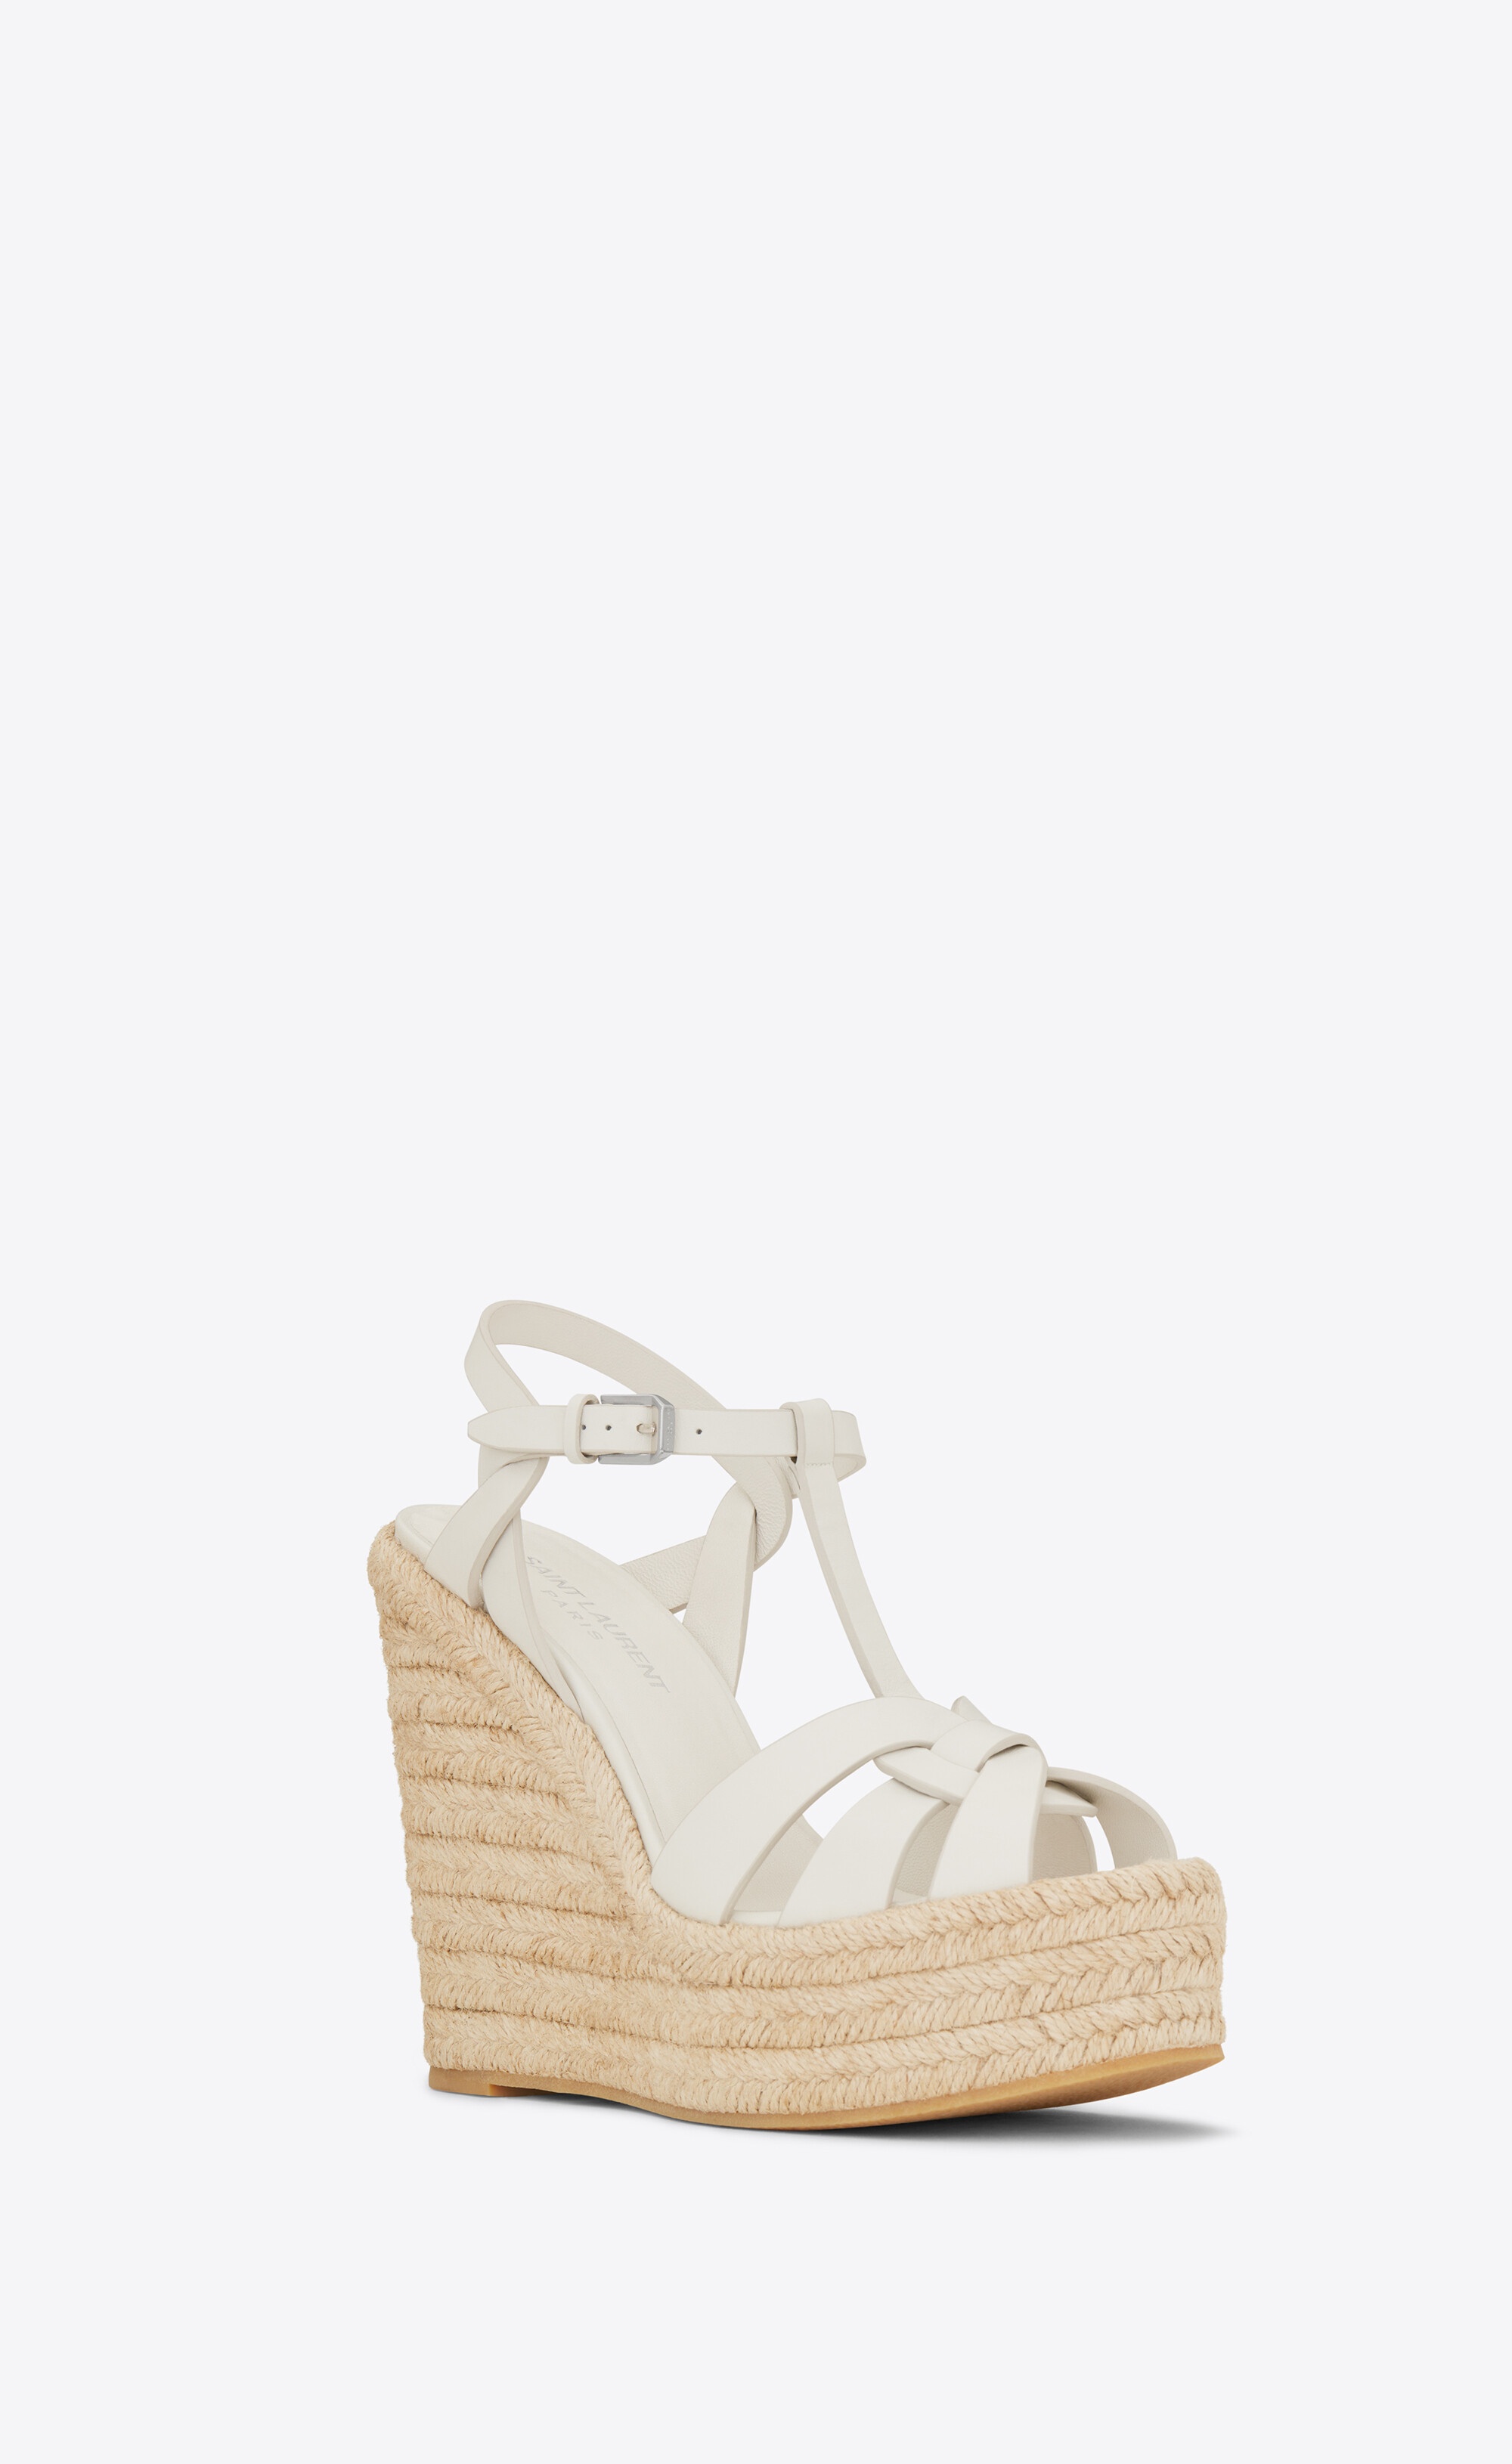 tribute espadrilles wedge in smooth leather - 3